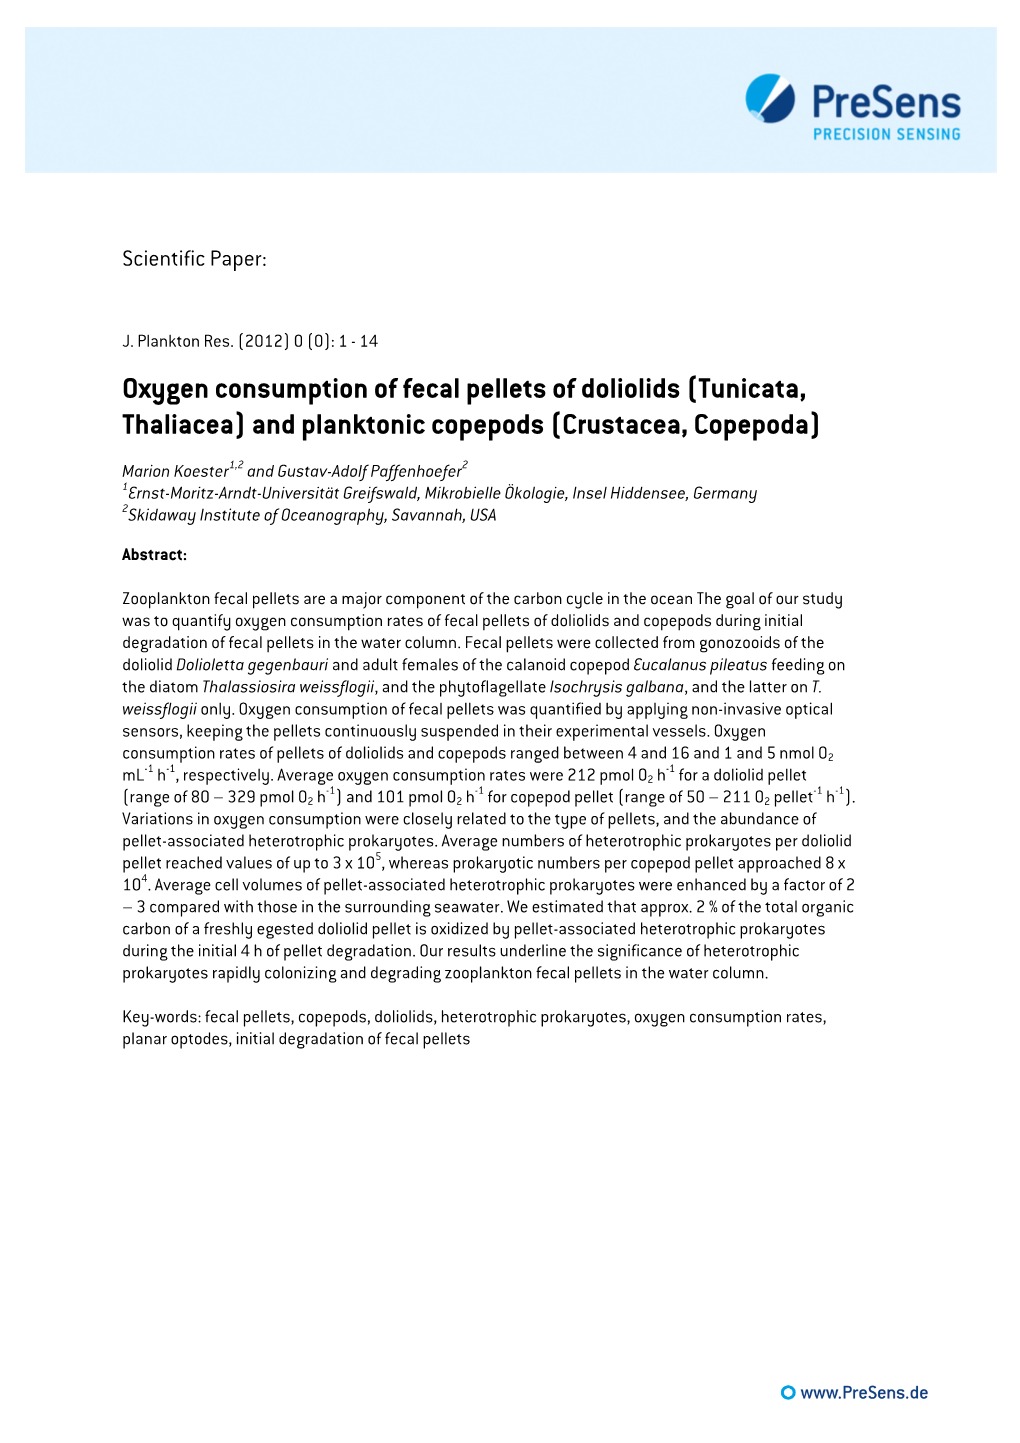 Oxygen Consumption of Fecal Pellets of Doliolids (Tunicata, Thaliacea) and Planktonic Copepods (Crustacea, Copepoda)